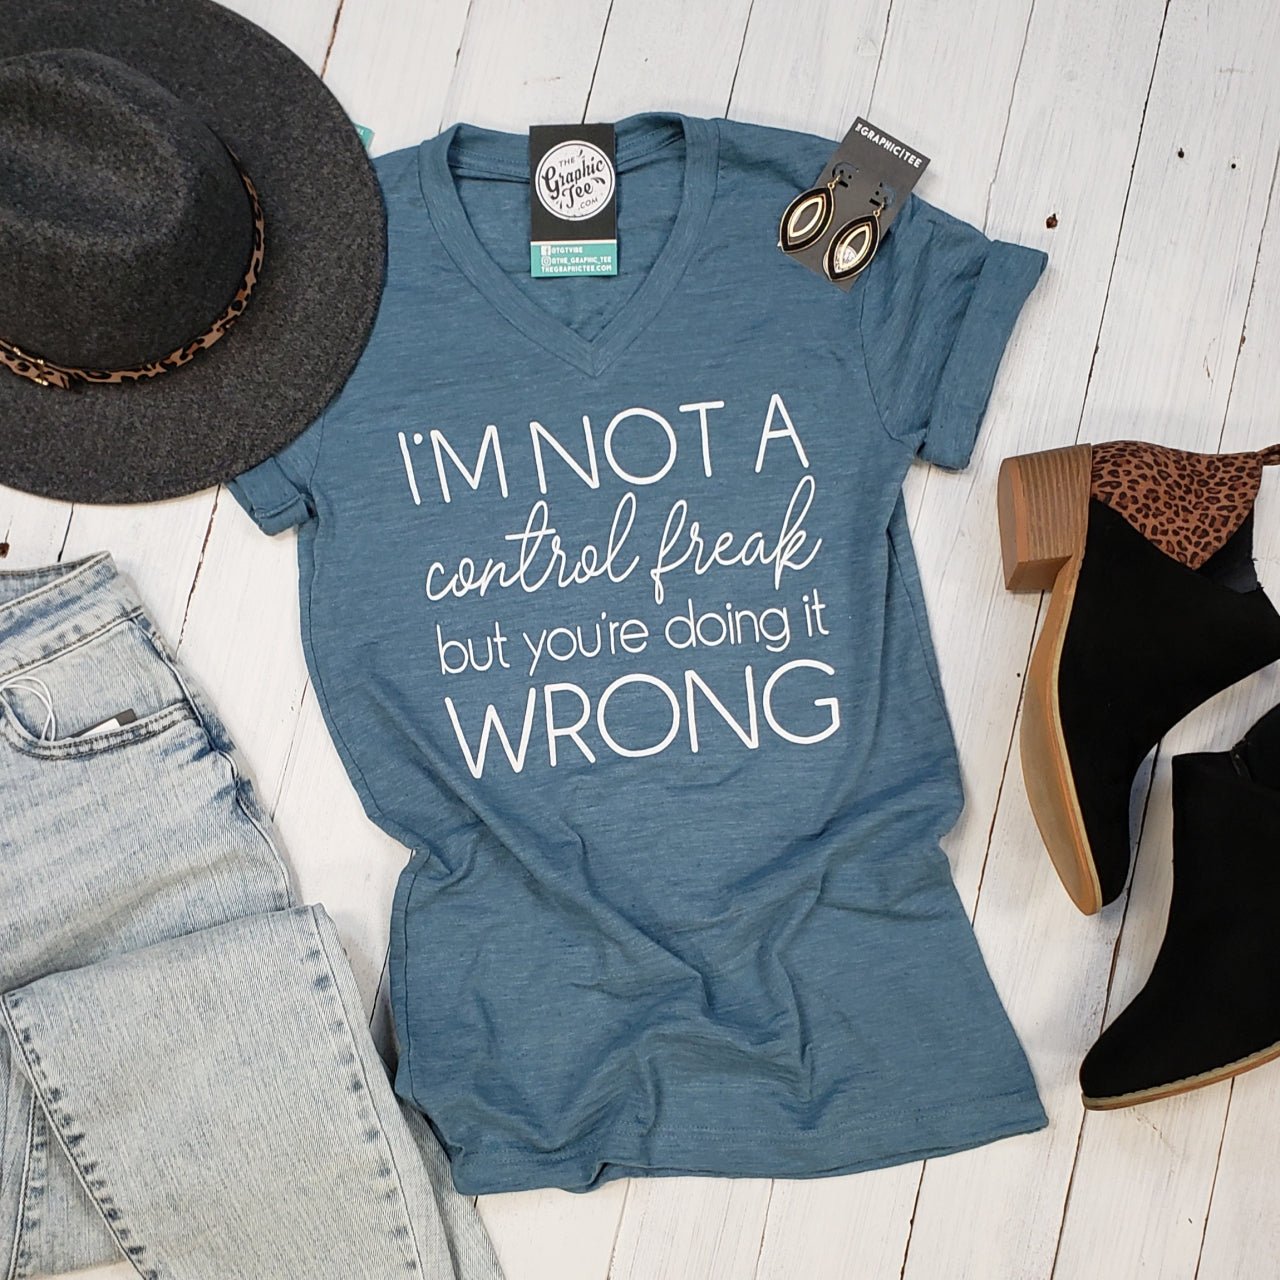 I'm Not A Control Freak, But You're Doing It Wrong V-Neck Tee - The Graphic Tee